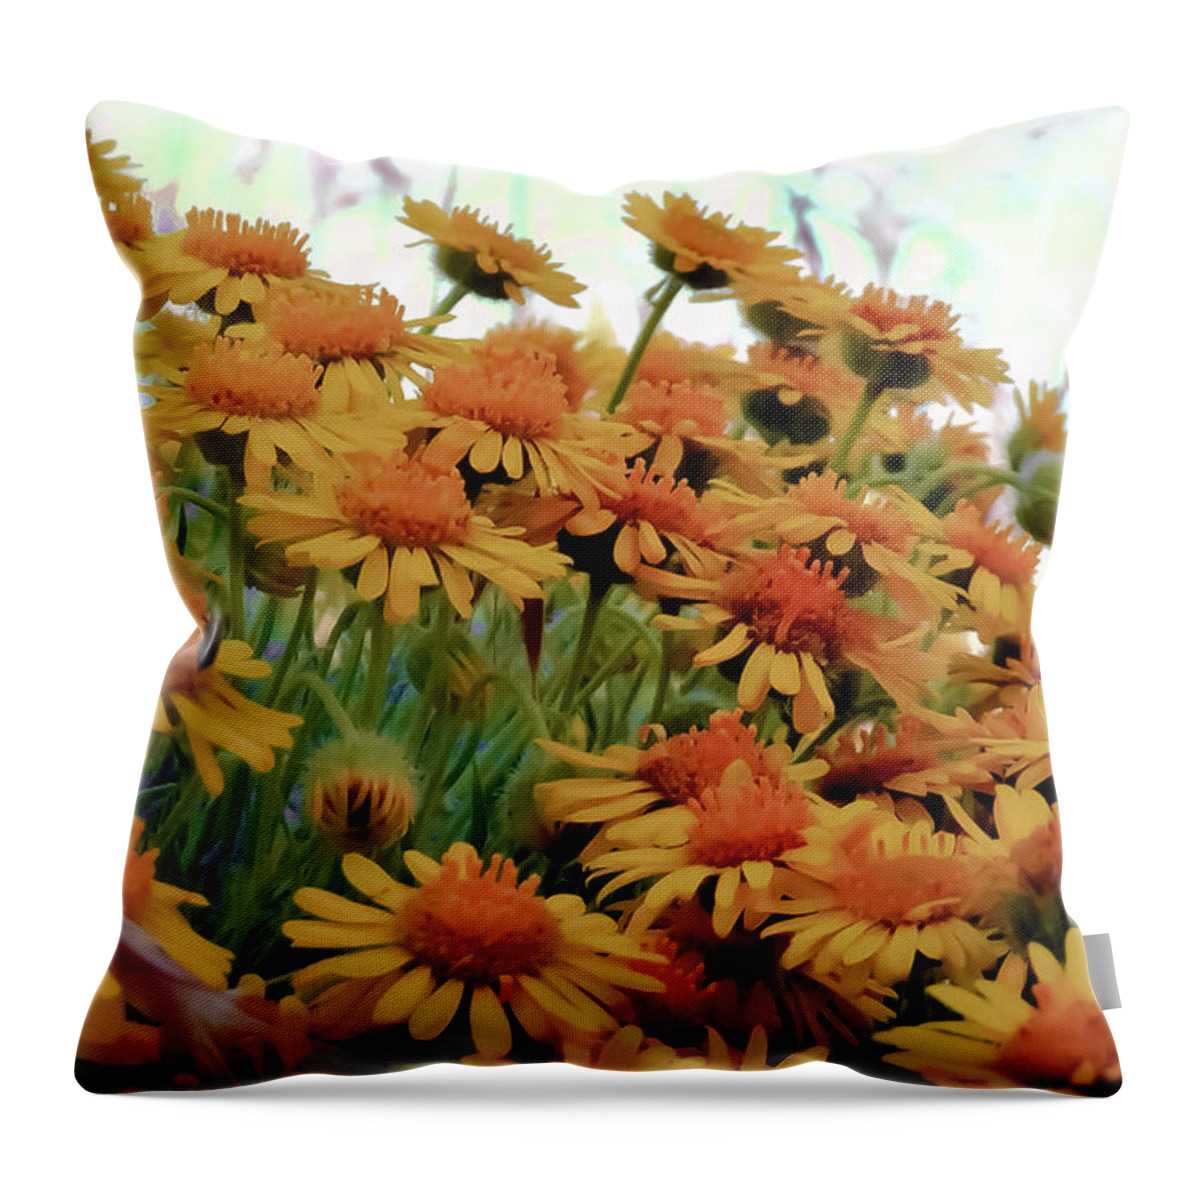 Piper's-daisy Throw Pillow featuring the photograph Pipers Daisy by Lisa Kaiser